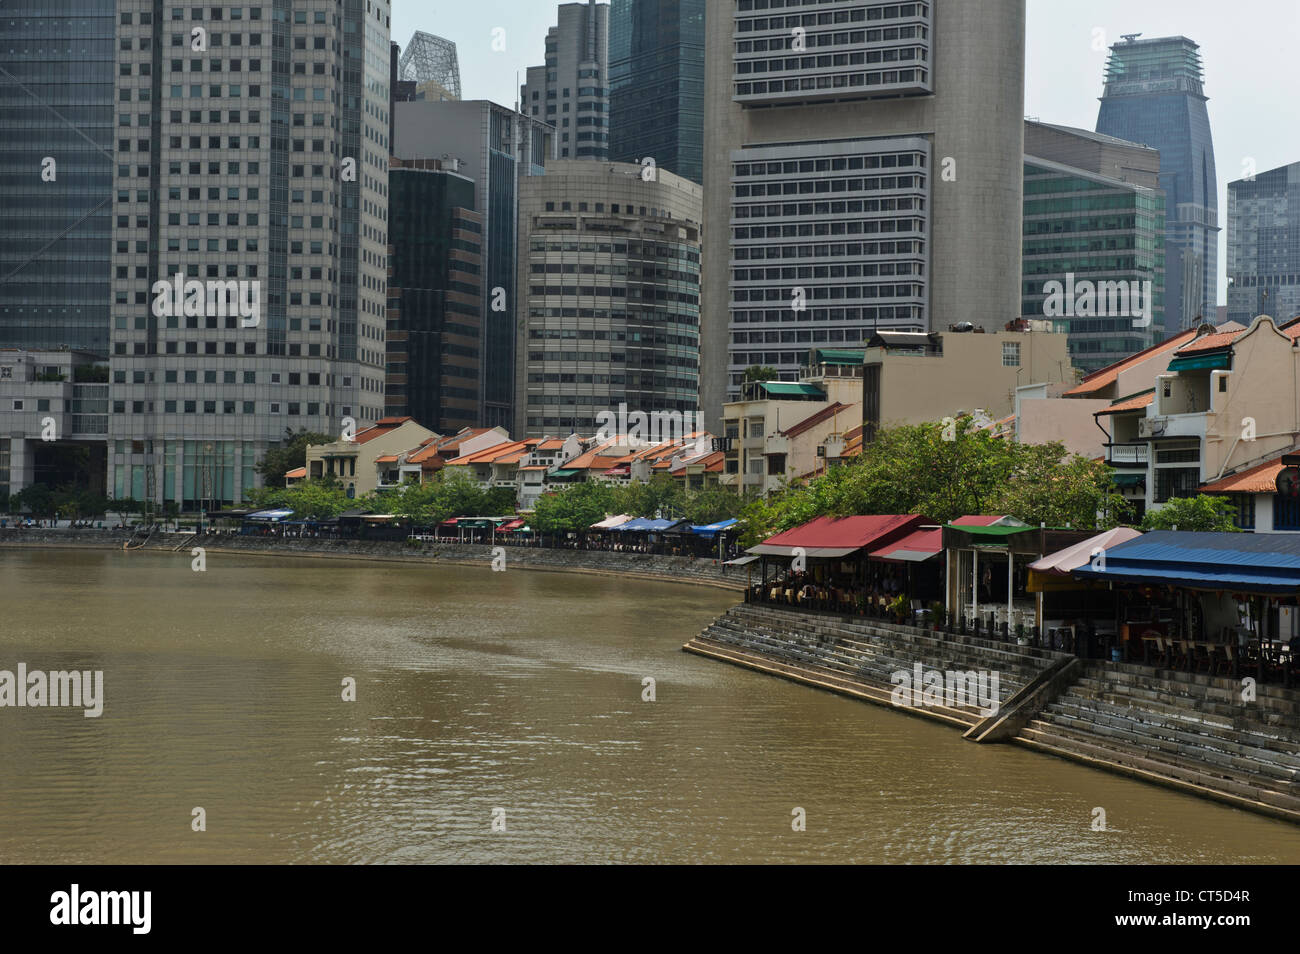 Boat Quay by the river with financial district in background, Singapore, Southeast Asia. Stock Photo